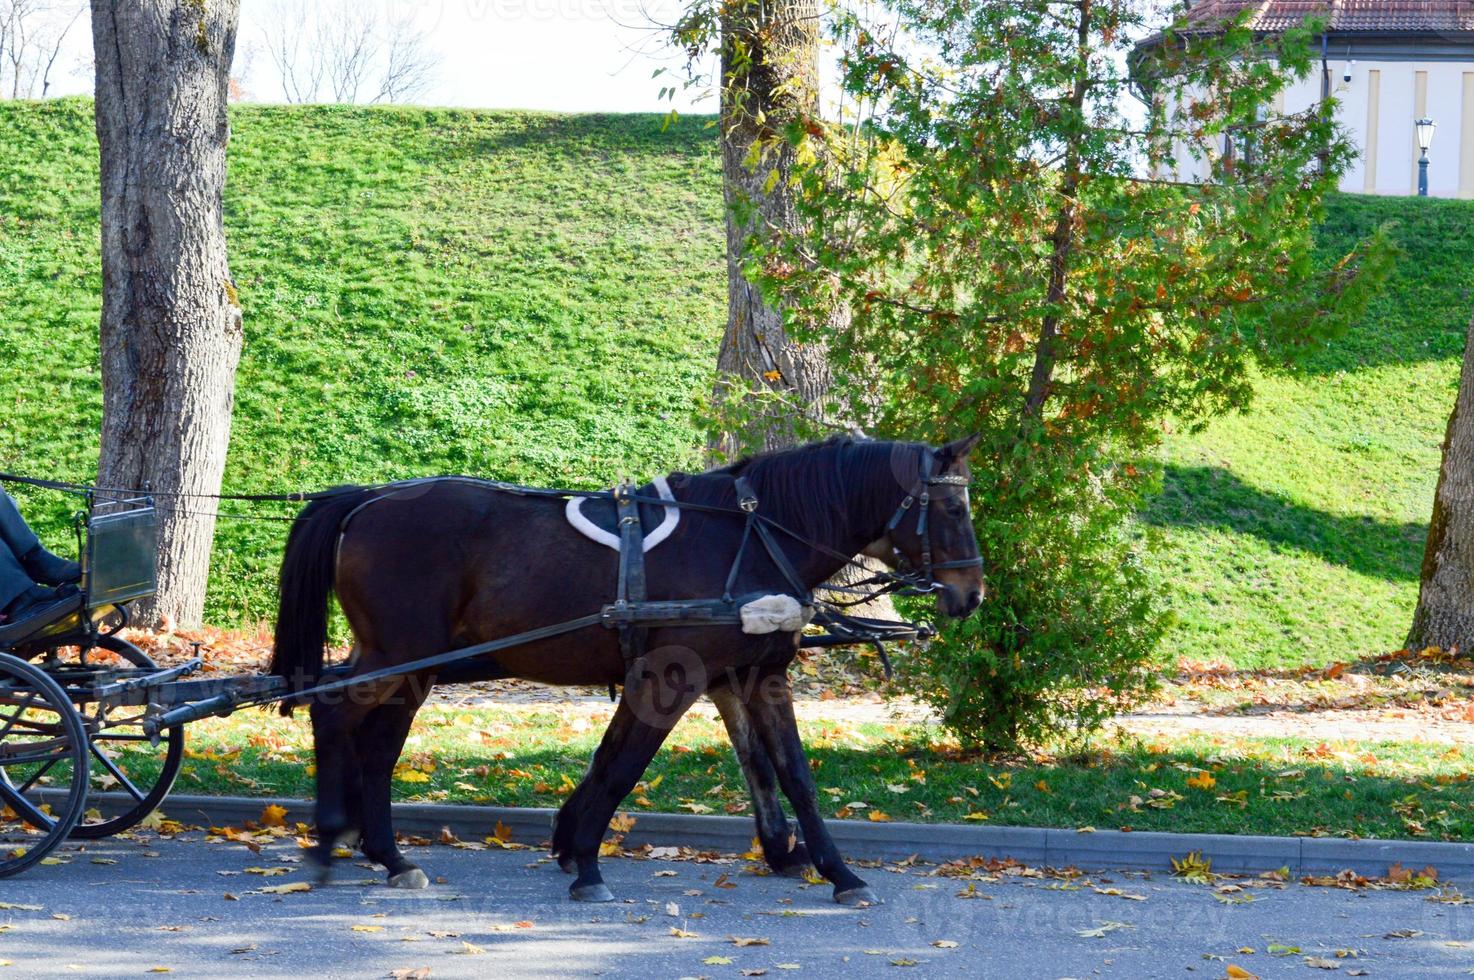 A beautiful black strong horse in harness pulls the carriage in the park on an asphalt road photo